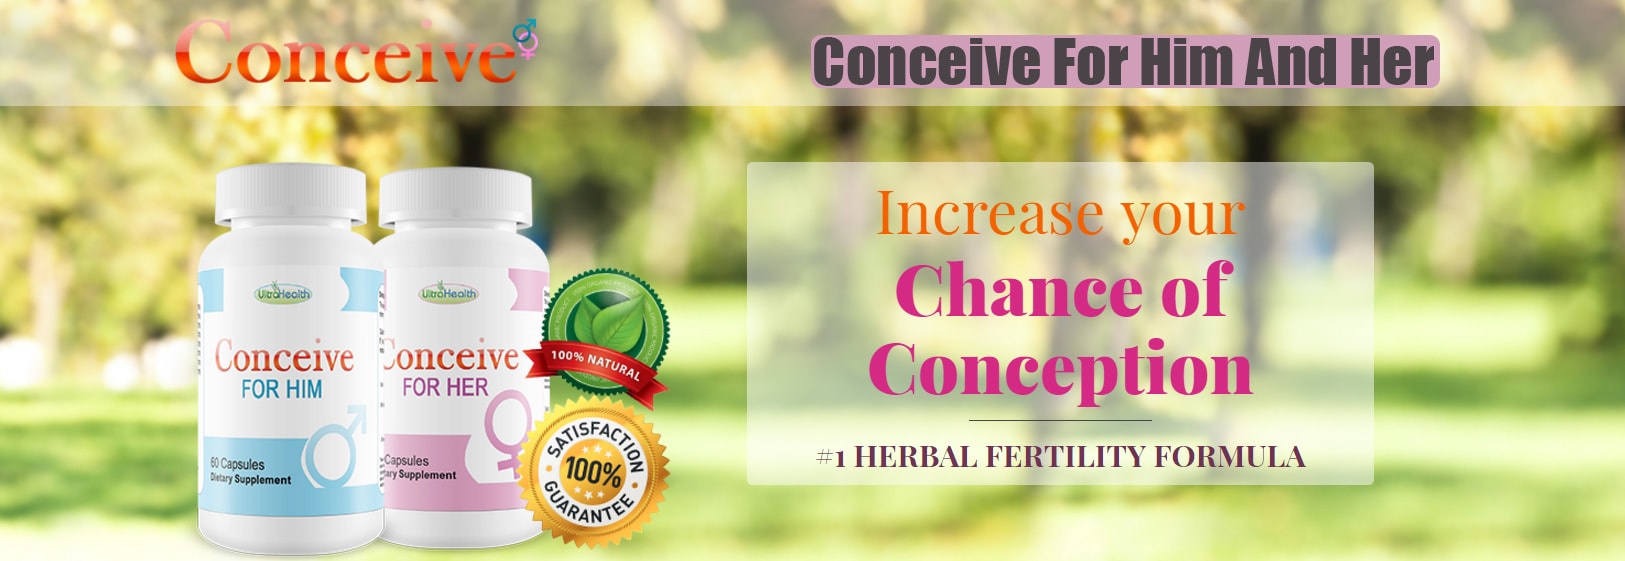 Conceive Easy Fertility Pills